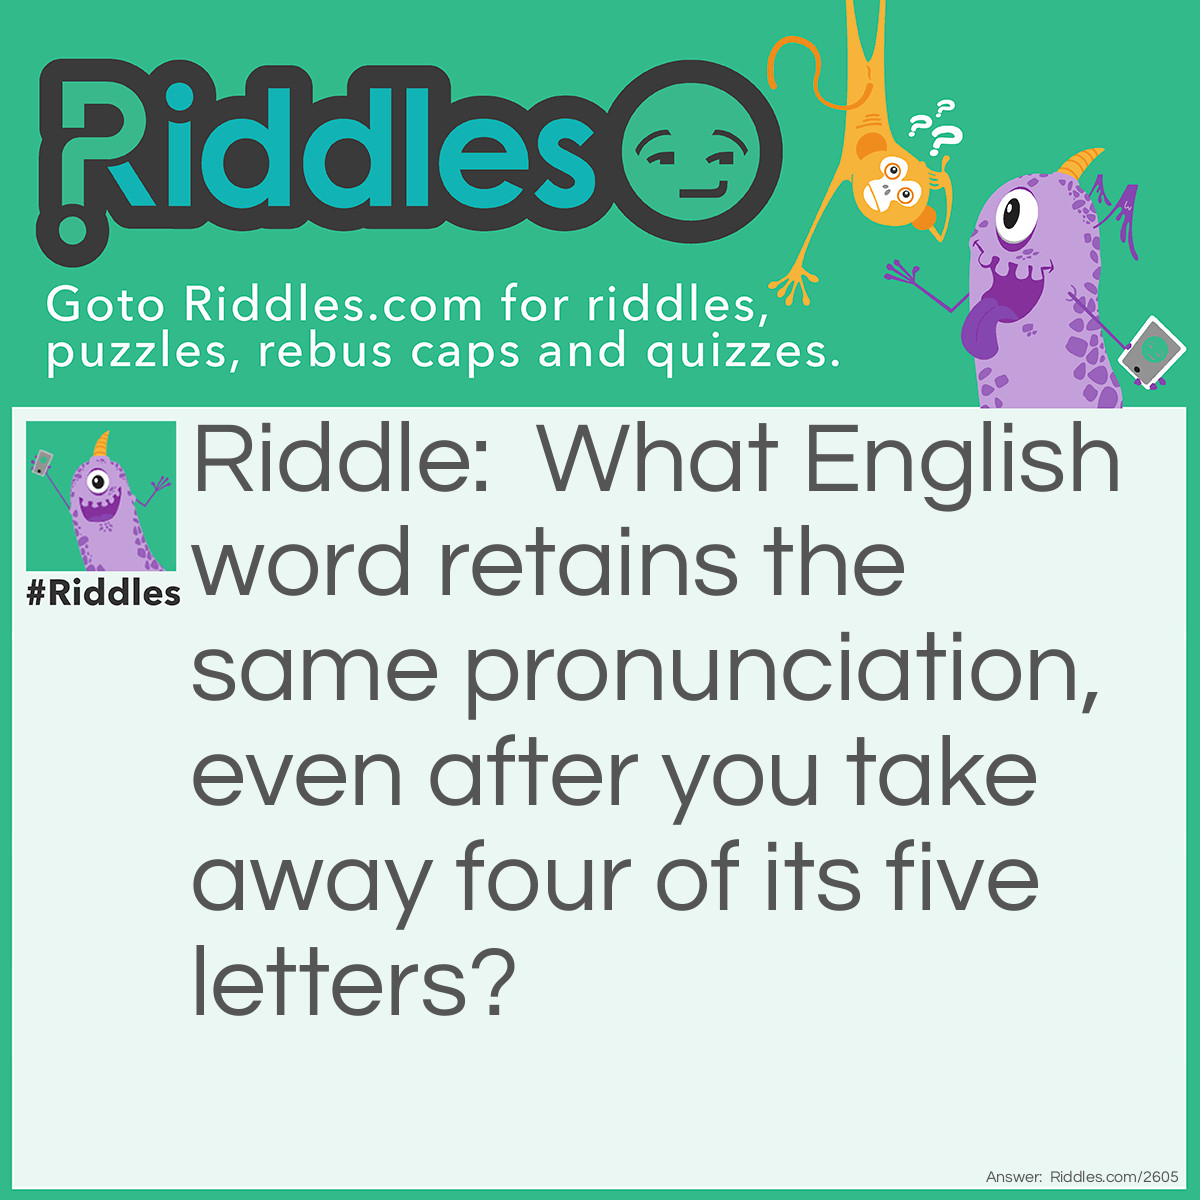 Riddle: What English word retains the same pronunciation, even after you take away four of its five letters? Answer: Queue. Remove the "ueue" and you are left with "Q".